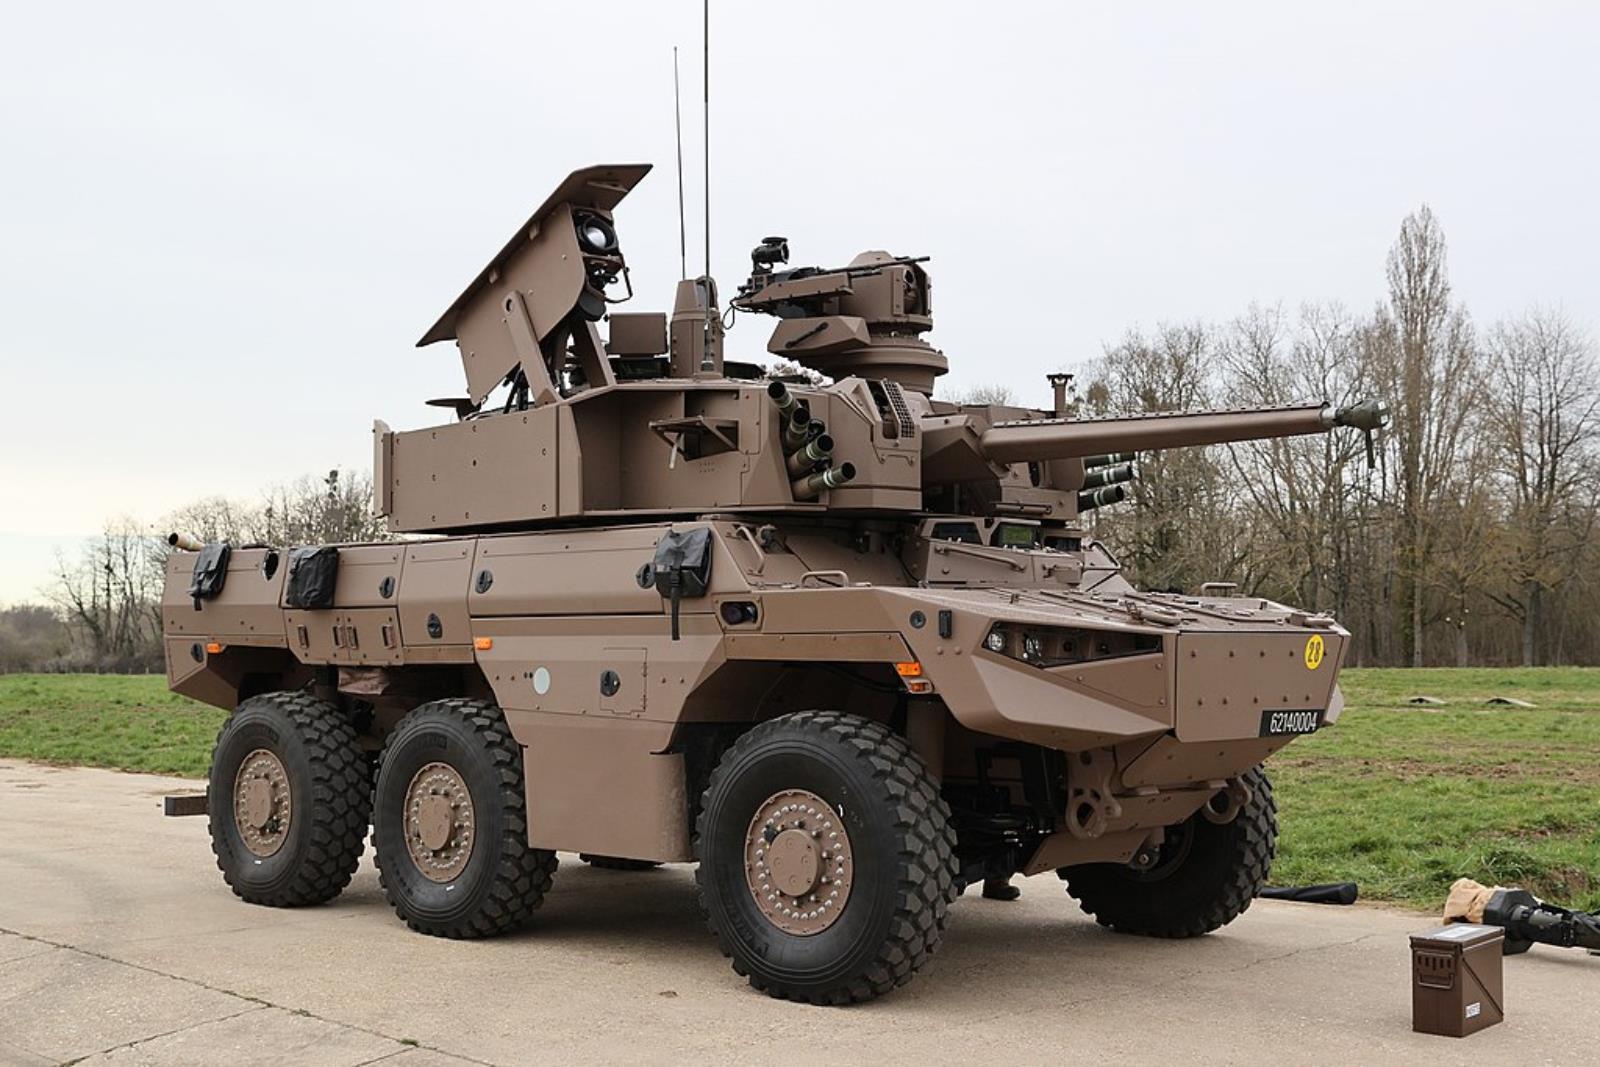 France is arming itself.  Modern armored vehicles for the French military